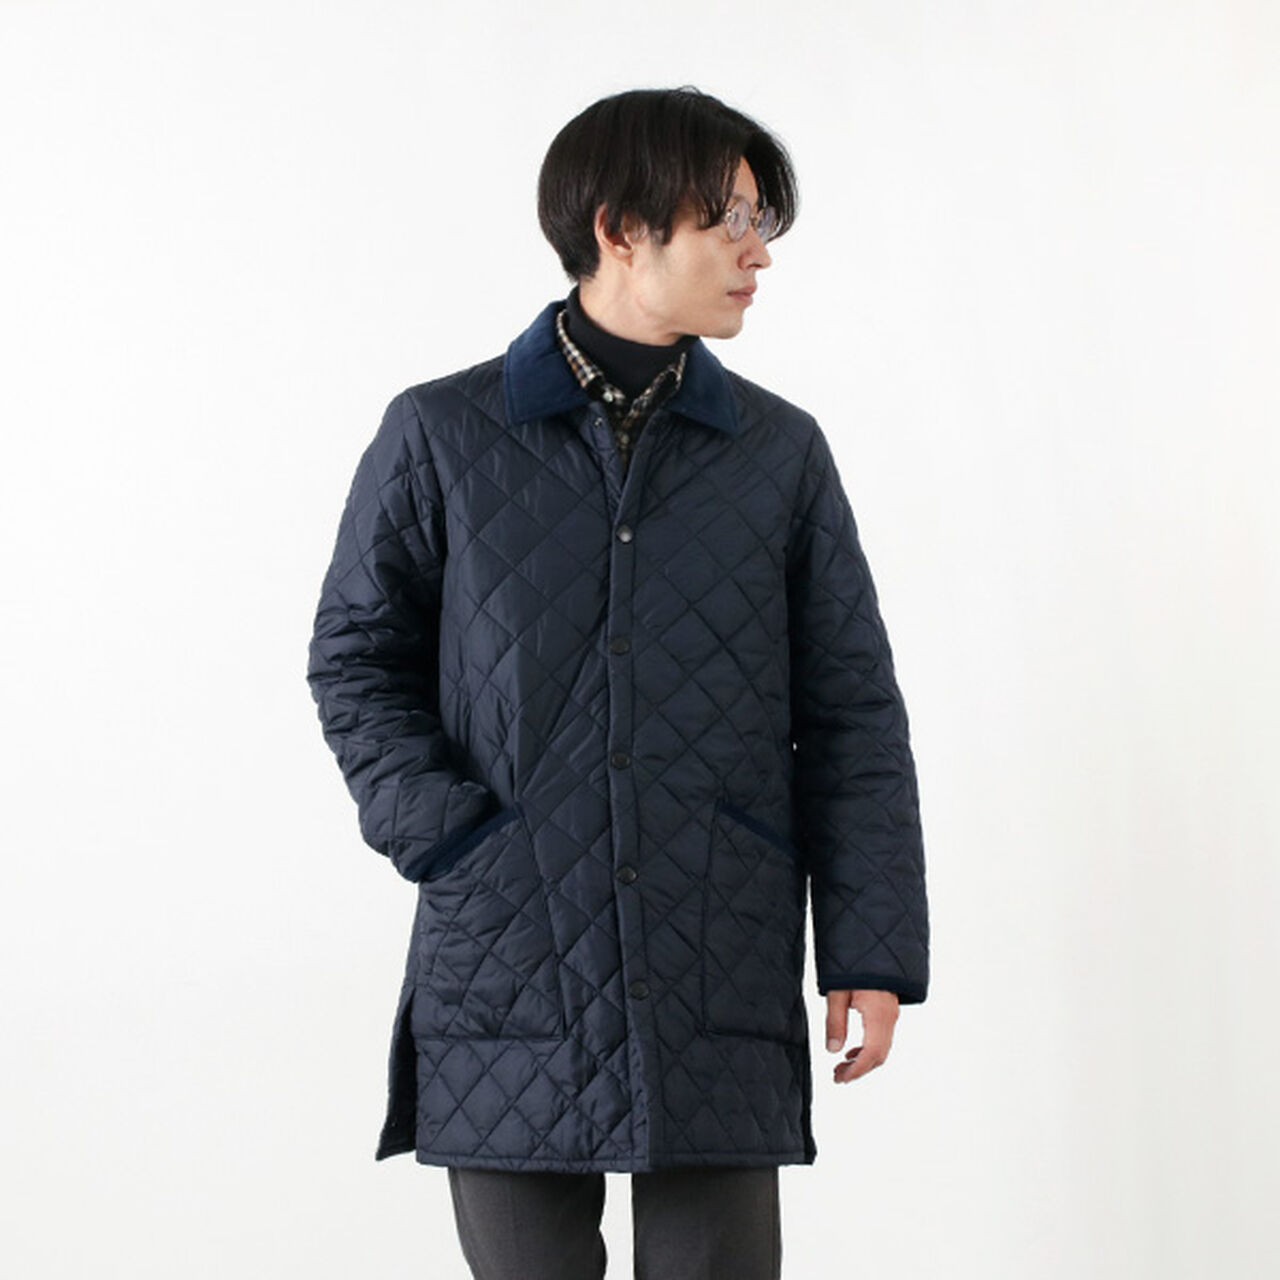 Ritzdale long nylon quilted jacket,Navy, large image number 0